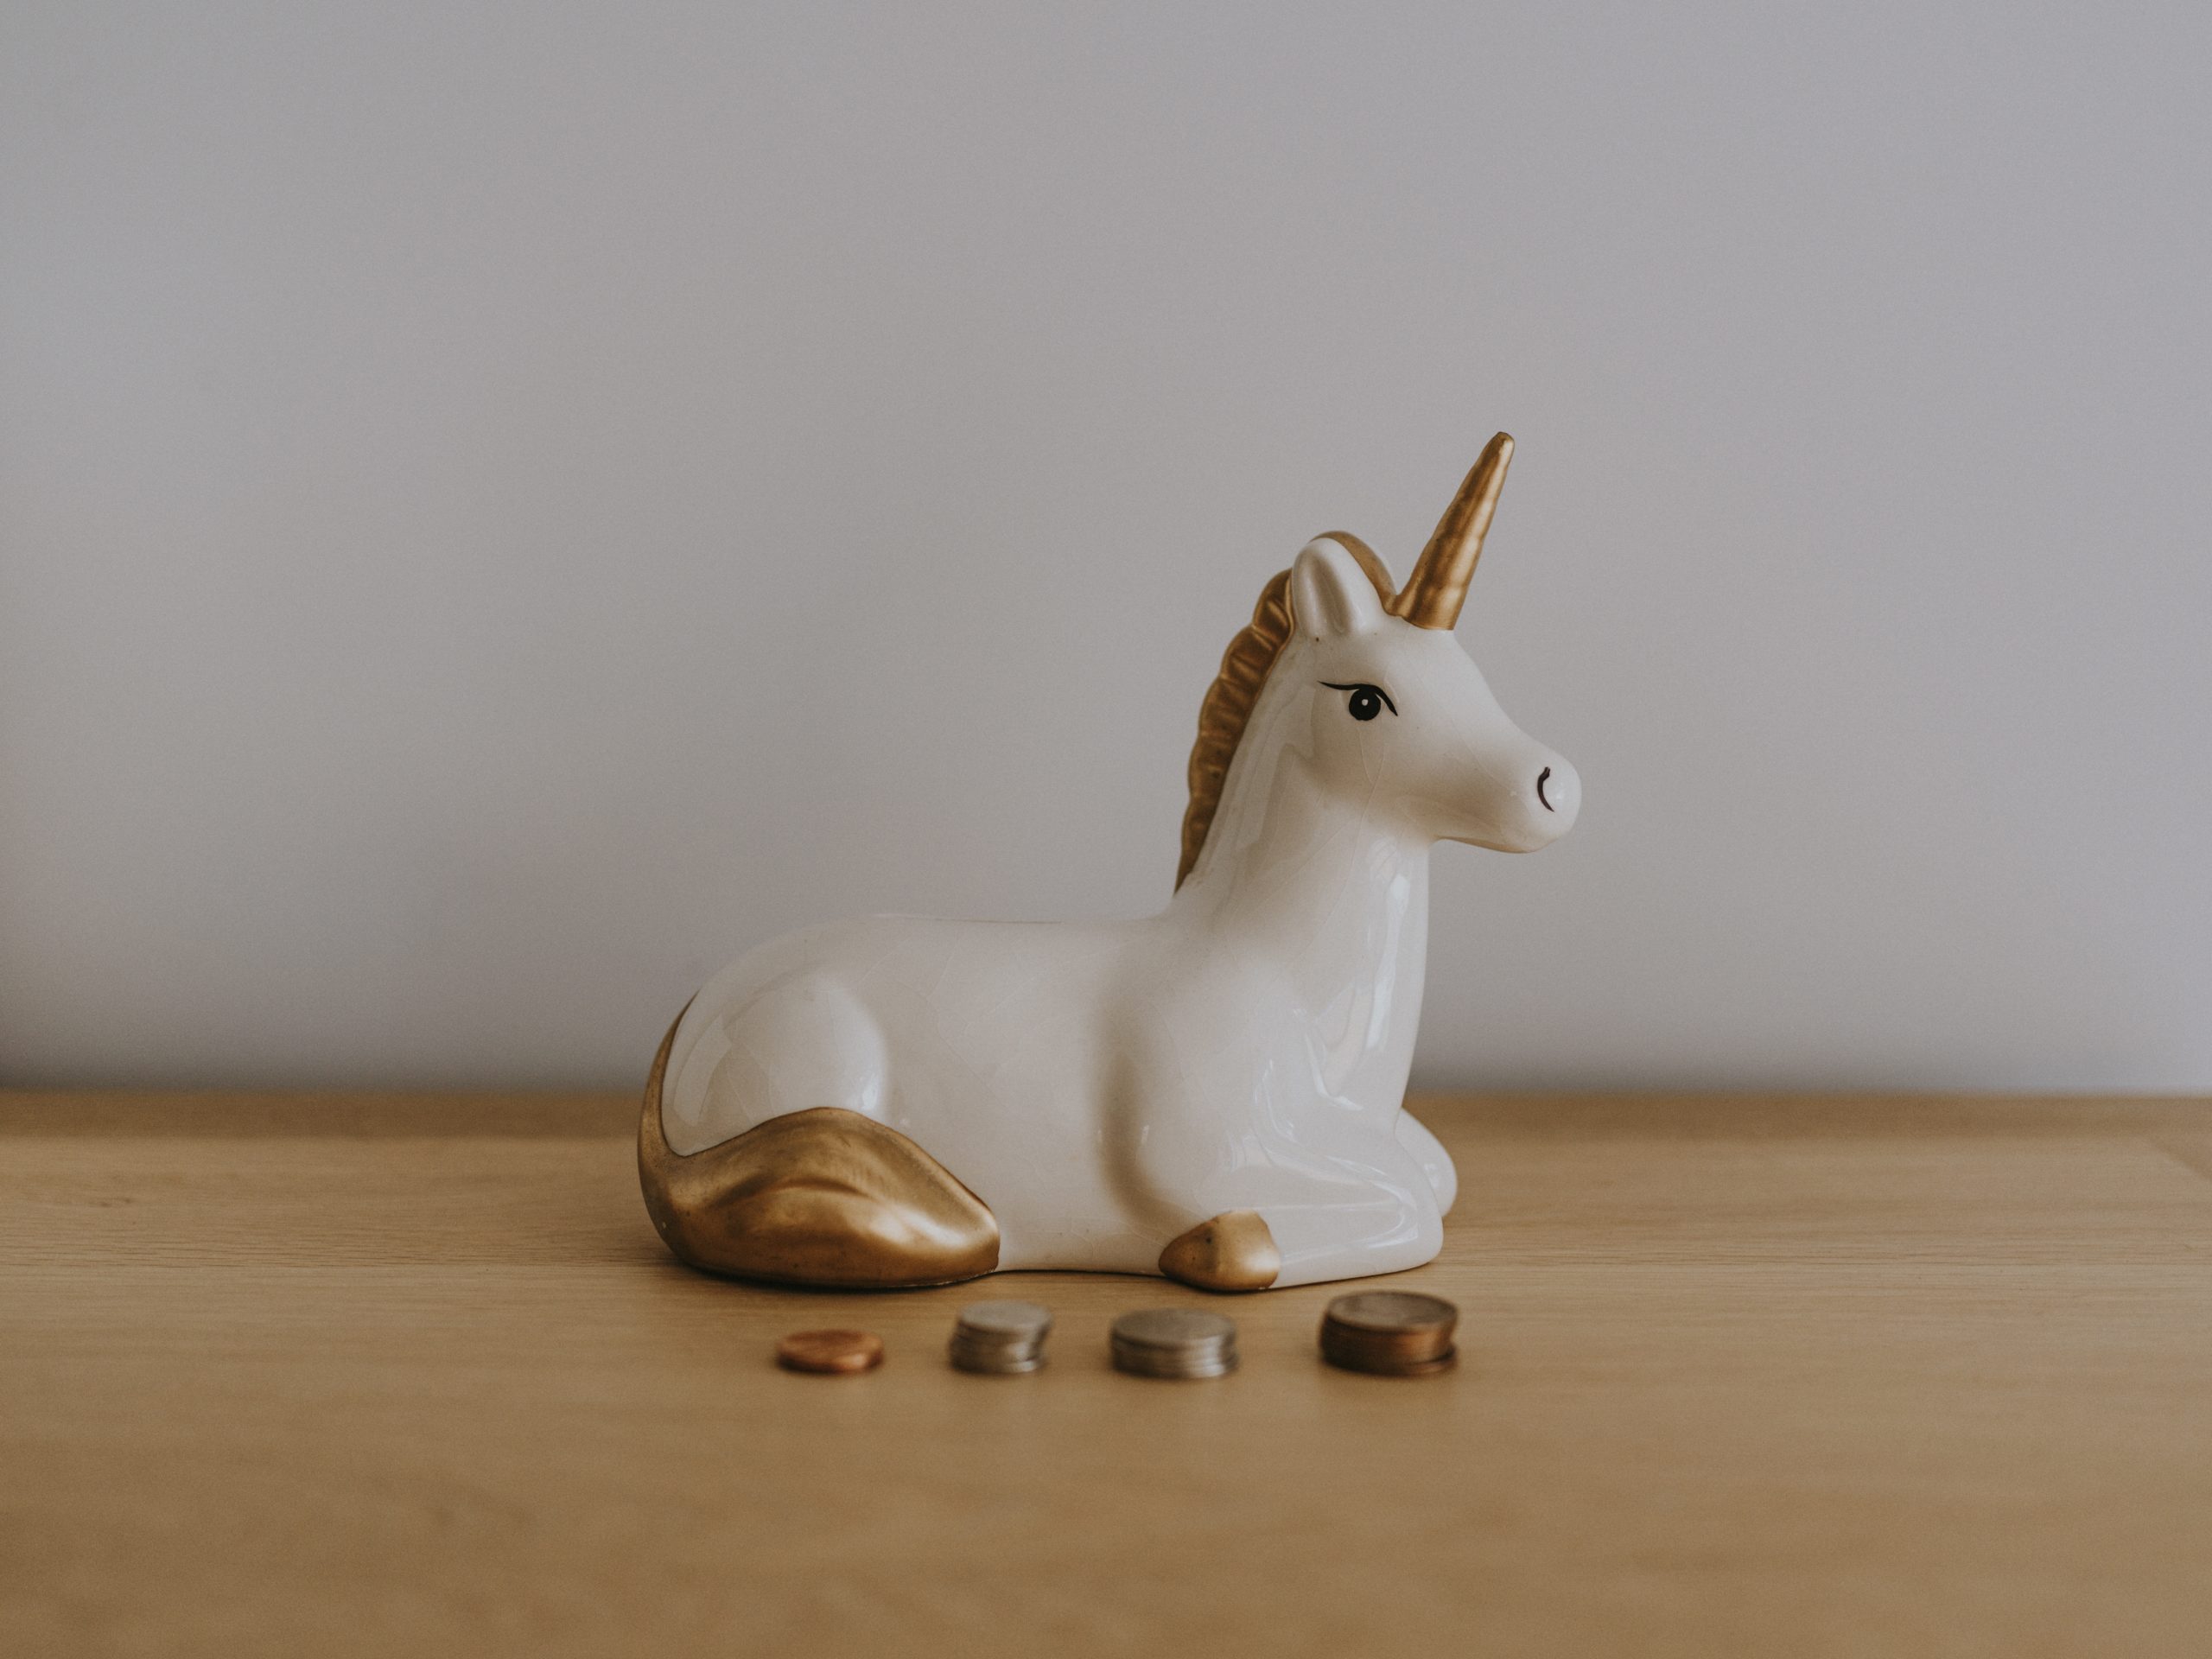 Unicorn or Fraud? WeWork Dissected!